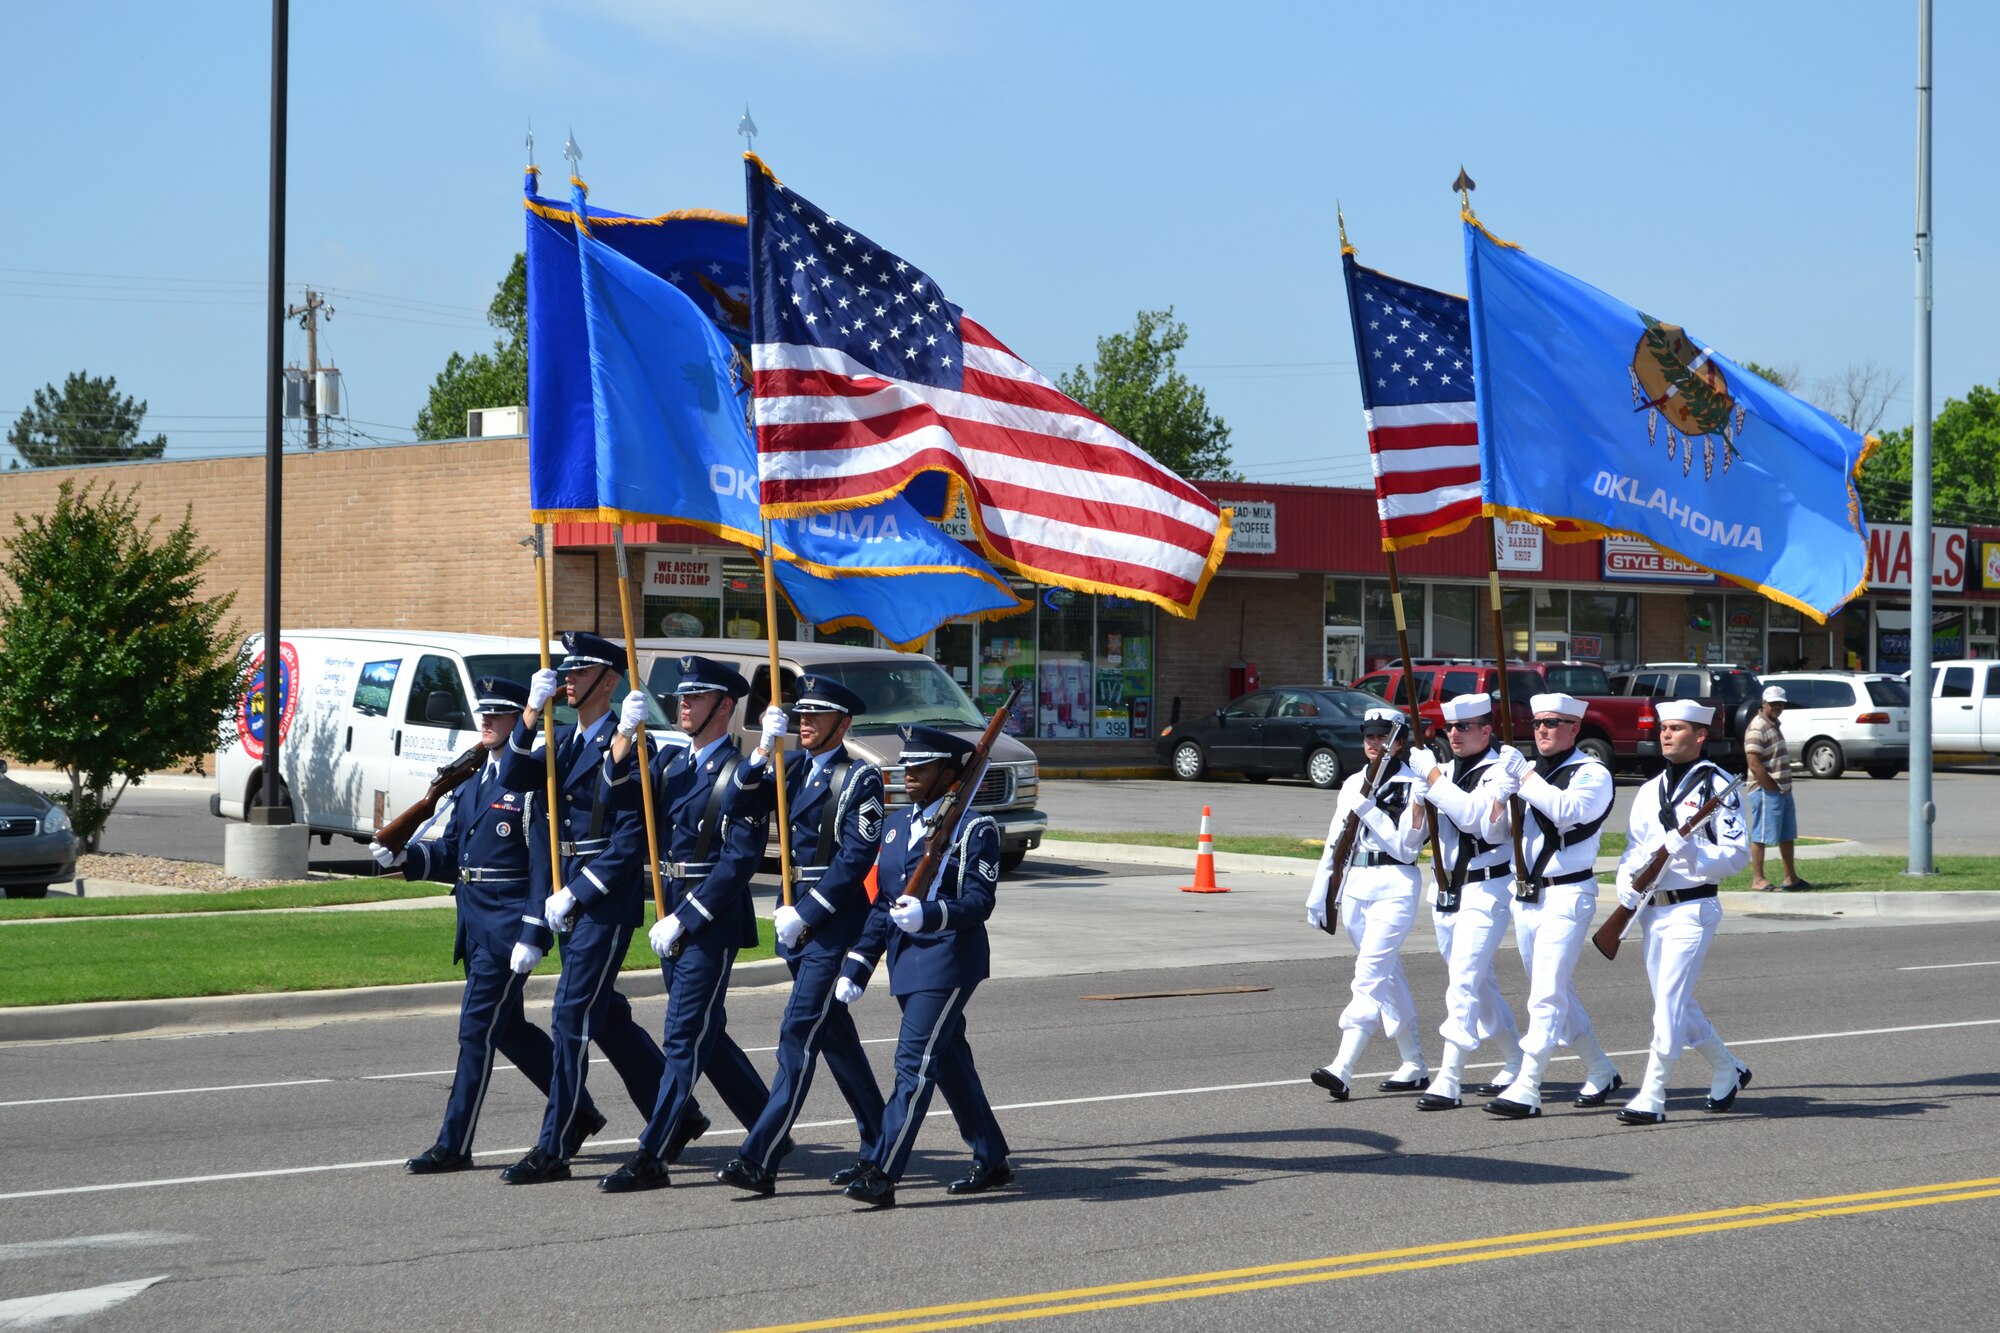 With flags flying, Tinker Honor Guards marched in last year’s Armed Forces Day Parade in Del City. This year’s parade is May 11 and Col. Steven J. Bleymaier, 72nd Air Base Wing commander, is the grand marshal. The parade starts at 
10 a.m. at the Howard Memorial Baptist Church, on the corner of Reno Avenue and Sunnylane Road. It proceeds south on Sunnylane to SE 29th Street, turns east onto SE 29th Street and goes to Linda Lane. (Air Force photo by Kathy Paine)